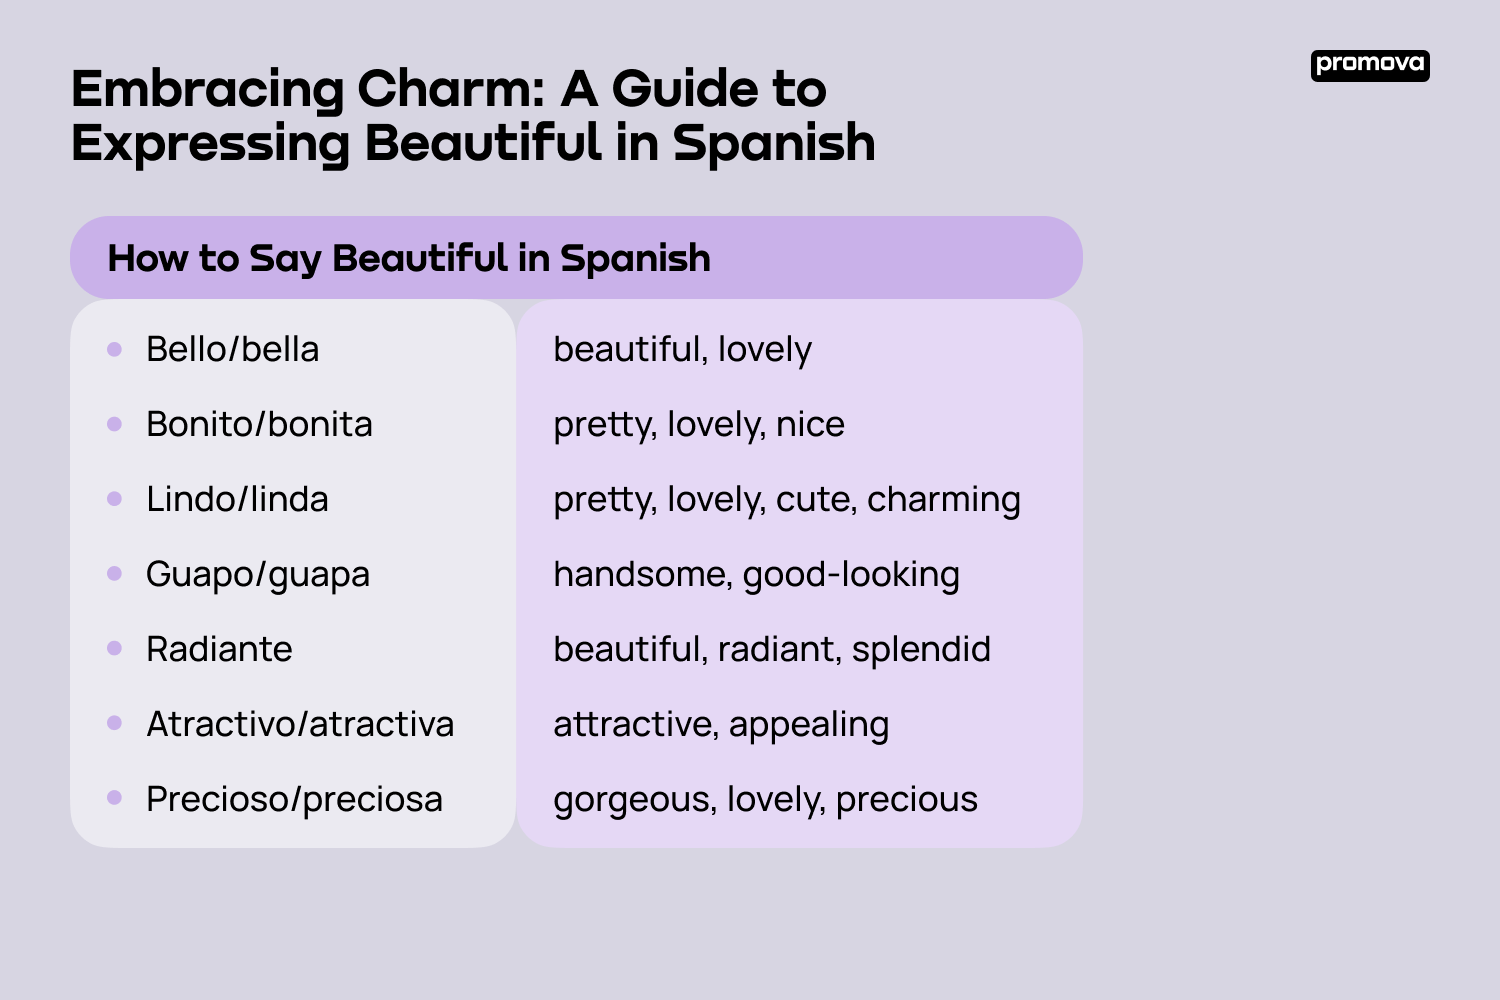 How to Say Beautiful in Spanish